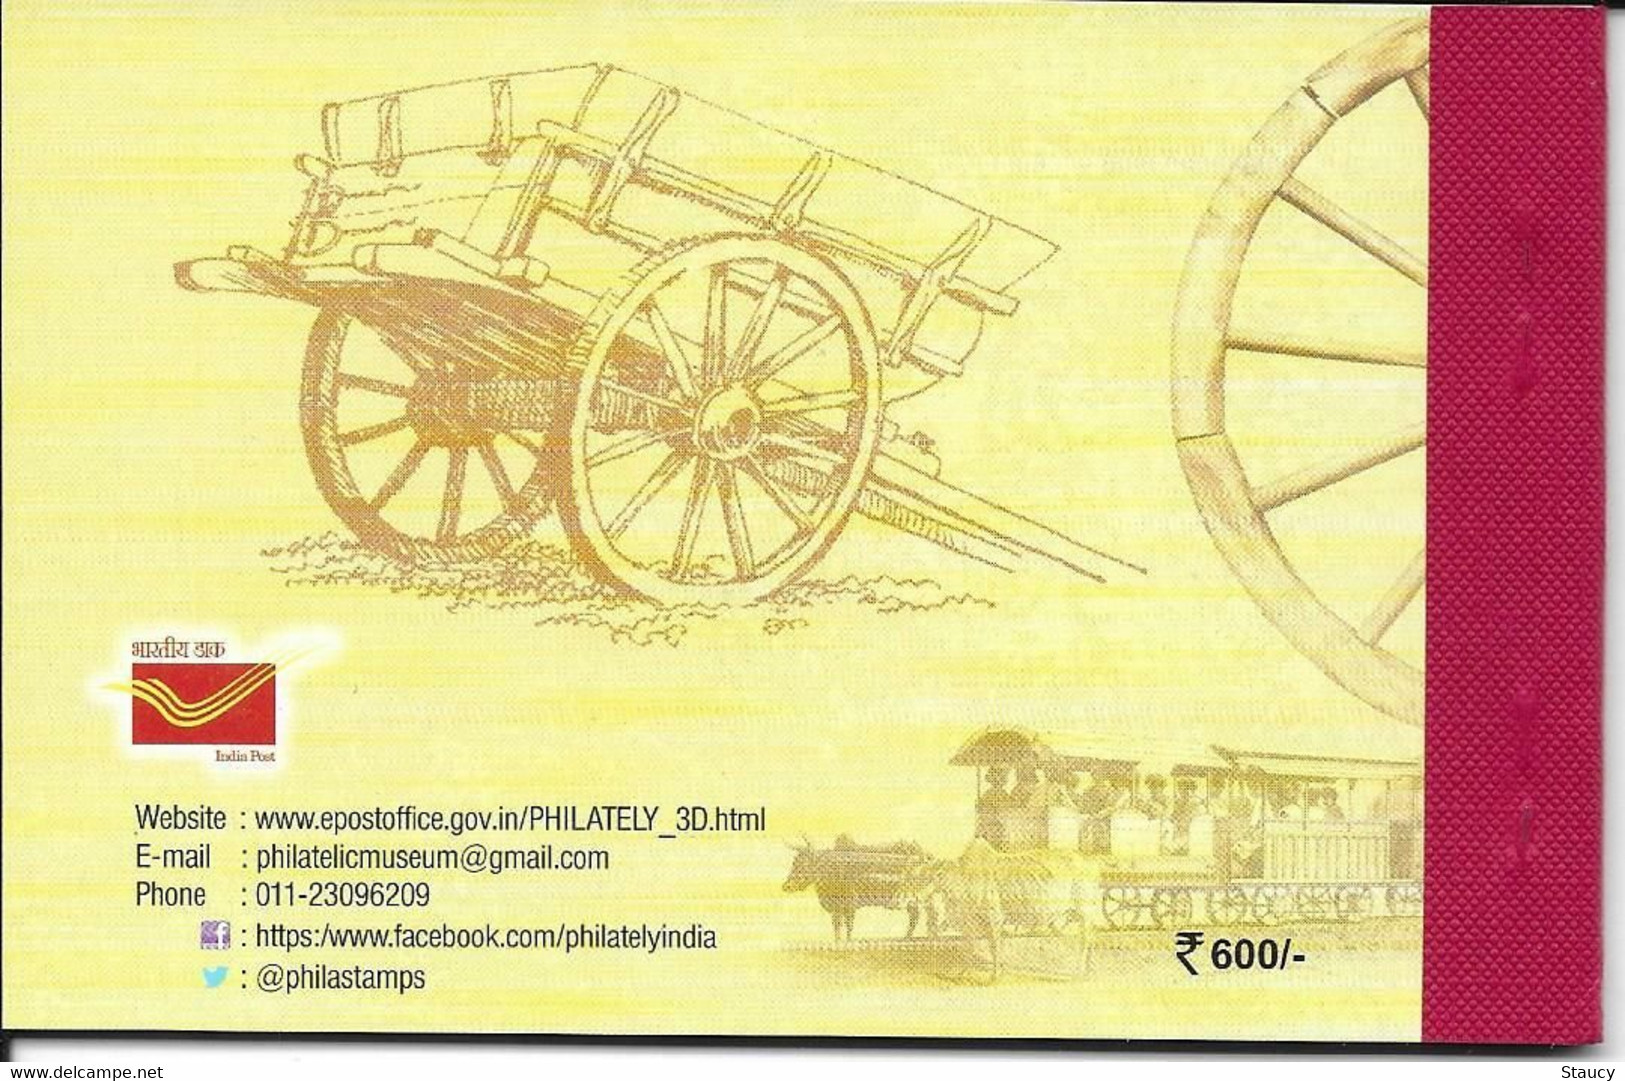 India 2017 Means of Transport Through Ages Complete Prestige Booklet containing 5 MINIATURE SHEETS MS MNH as per scan